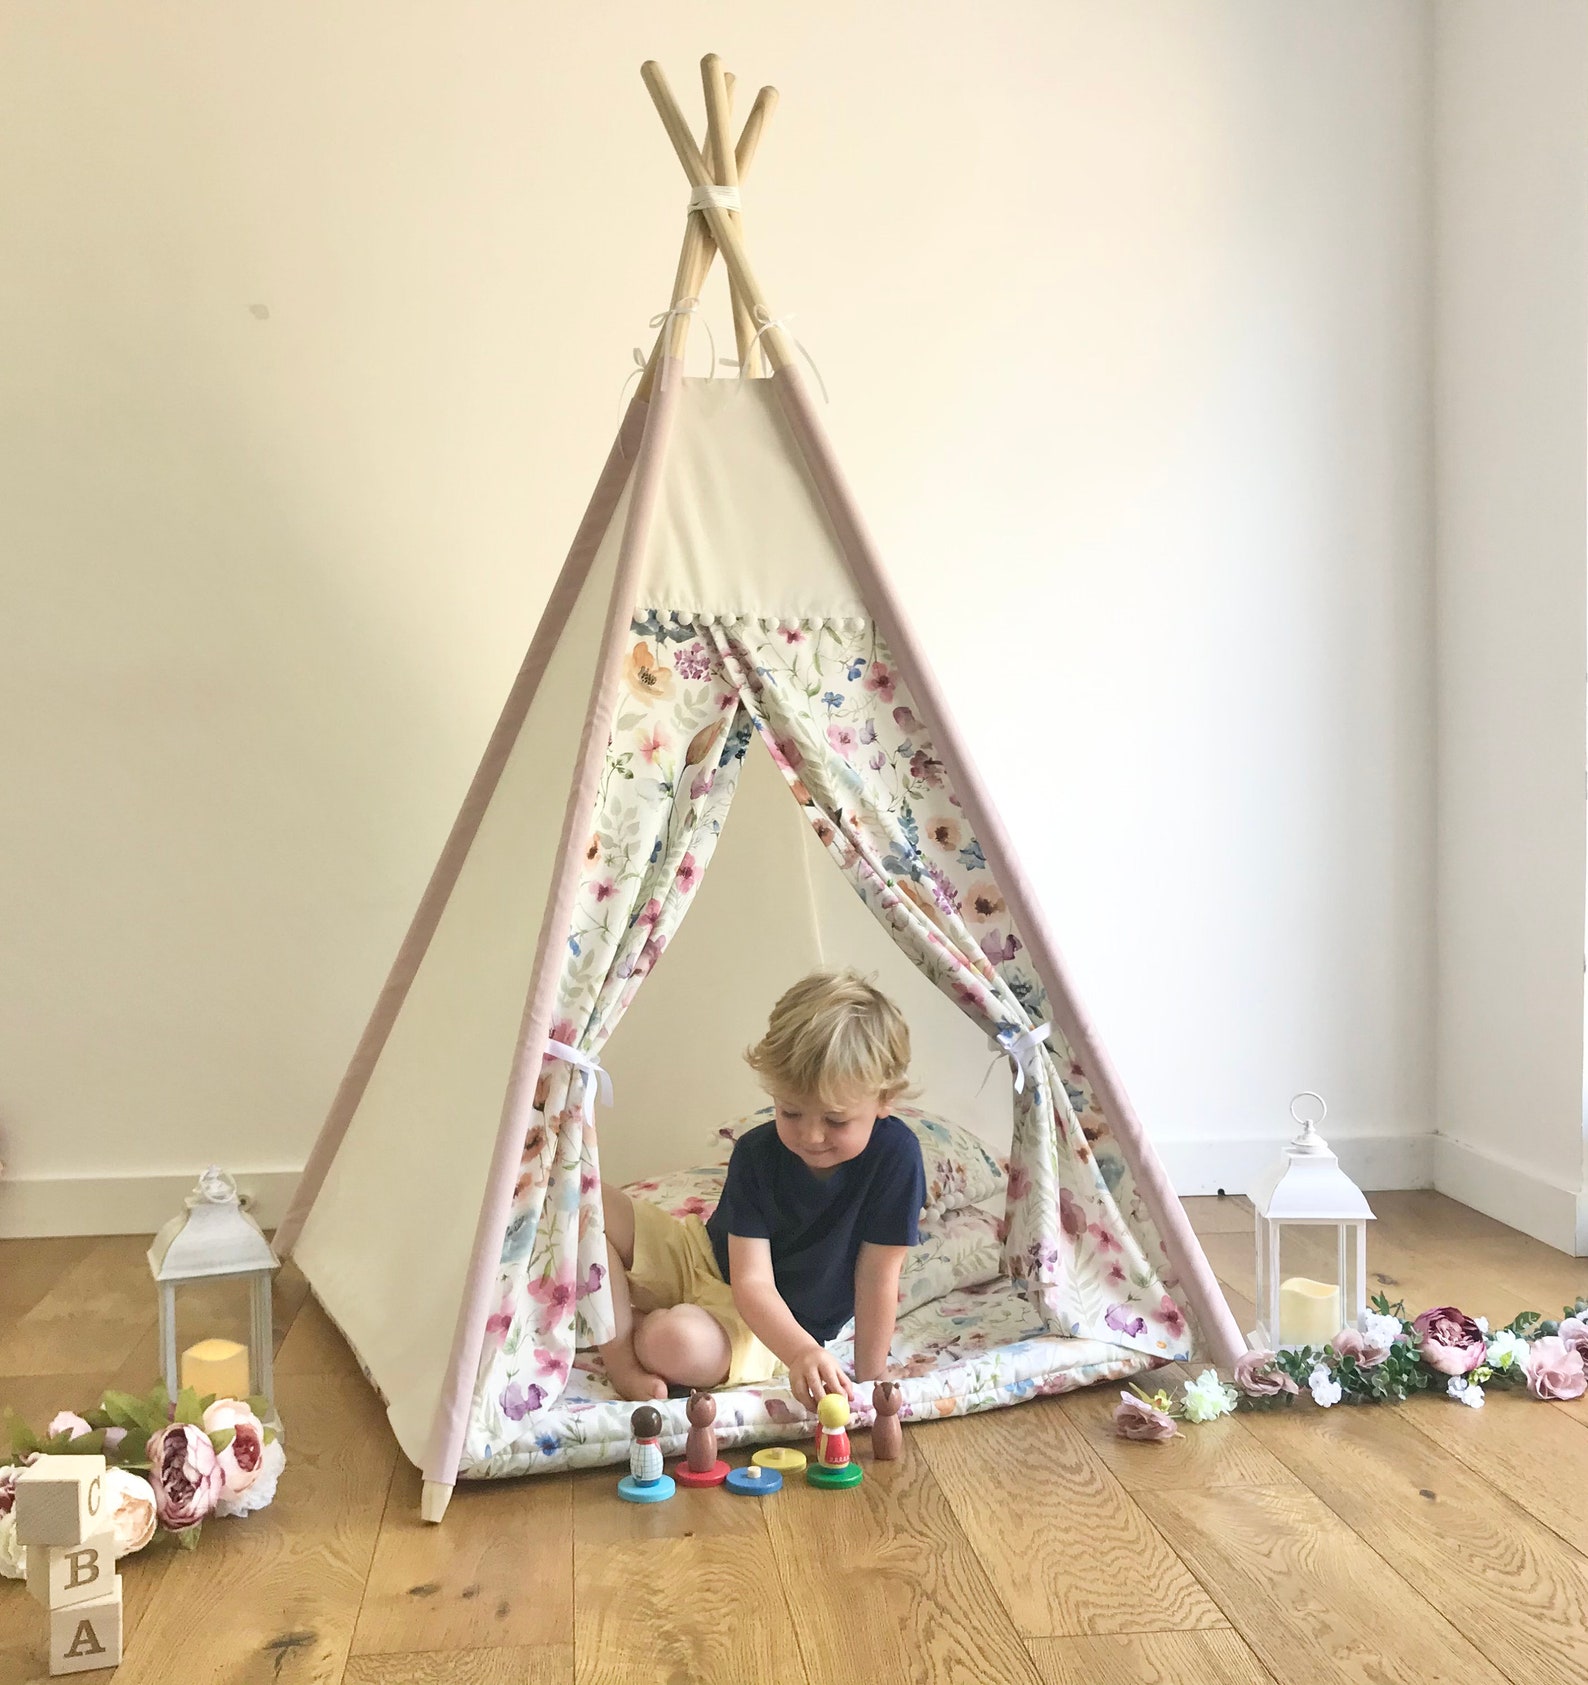 Childrens Teepee in New Summer Meadow With Pom-poms - Etsy UK